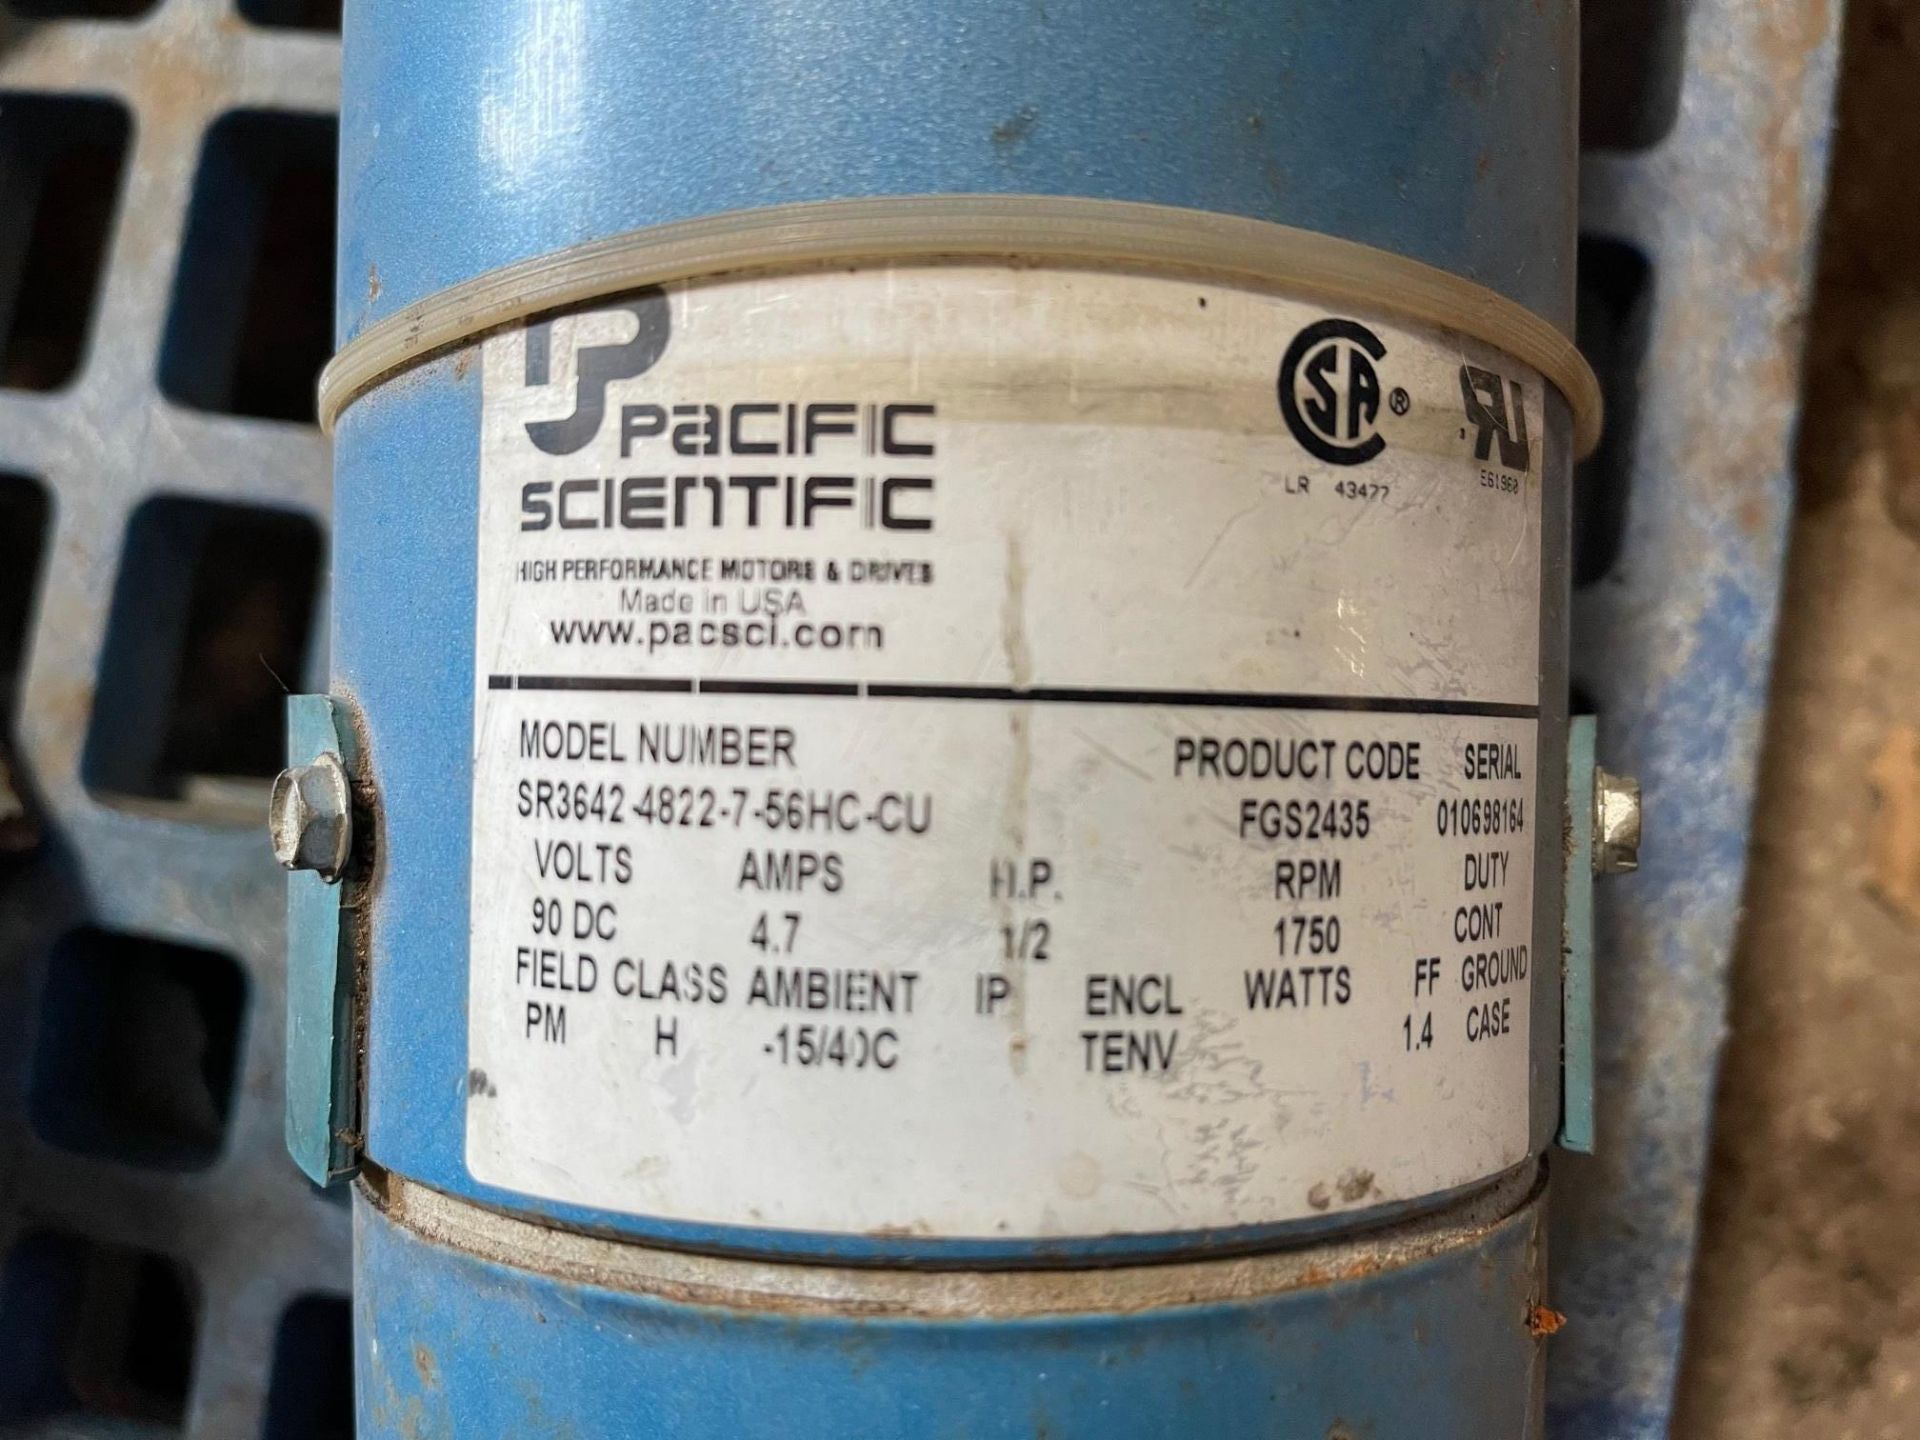 LOT OF WIRES, PLUGS, SUBMERSIBLE PUMP FLOATS TIMES FOUR, DC MOTOR AND GEARBOX 60:1 RATIO - Image 3 of 5